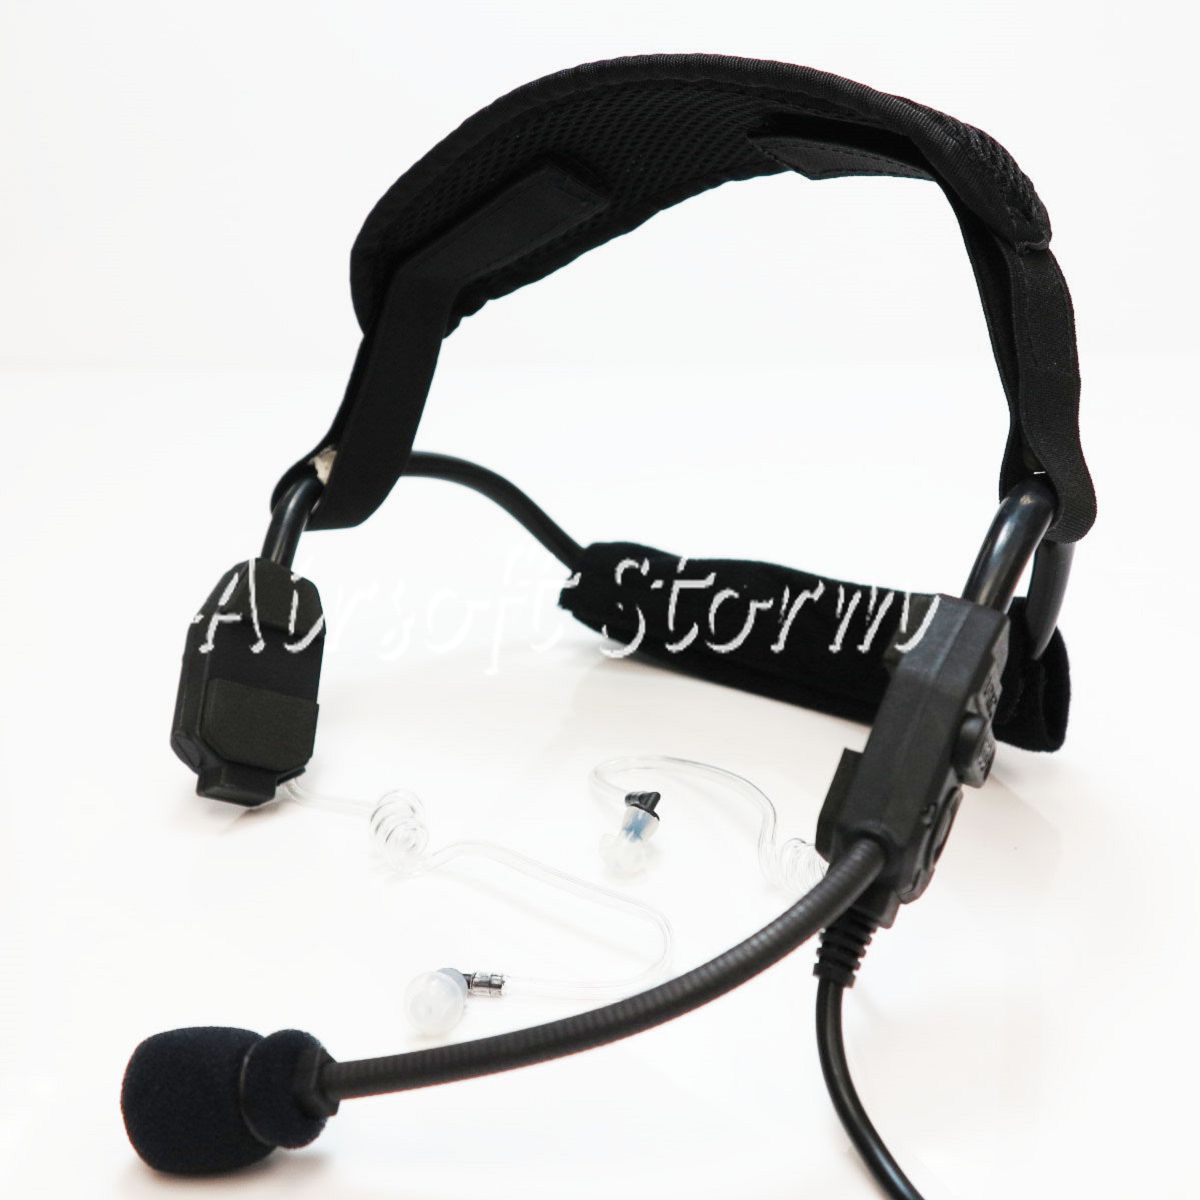 Airsoft Gear SWAT Z Tactical THREAT4 X-62000 Headset Black